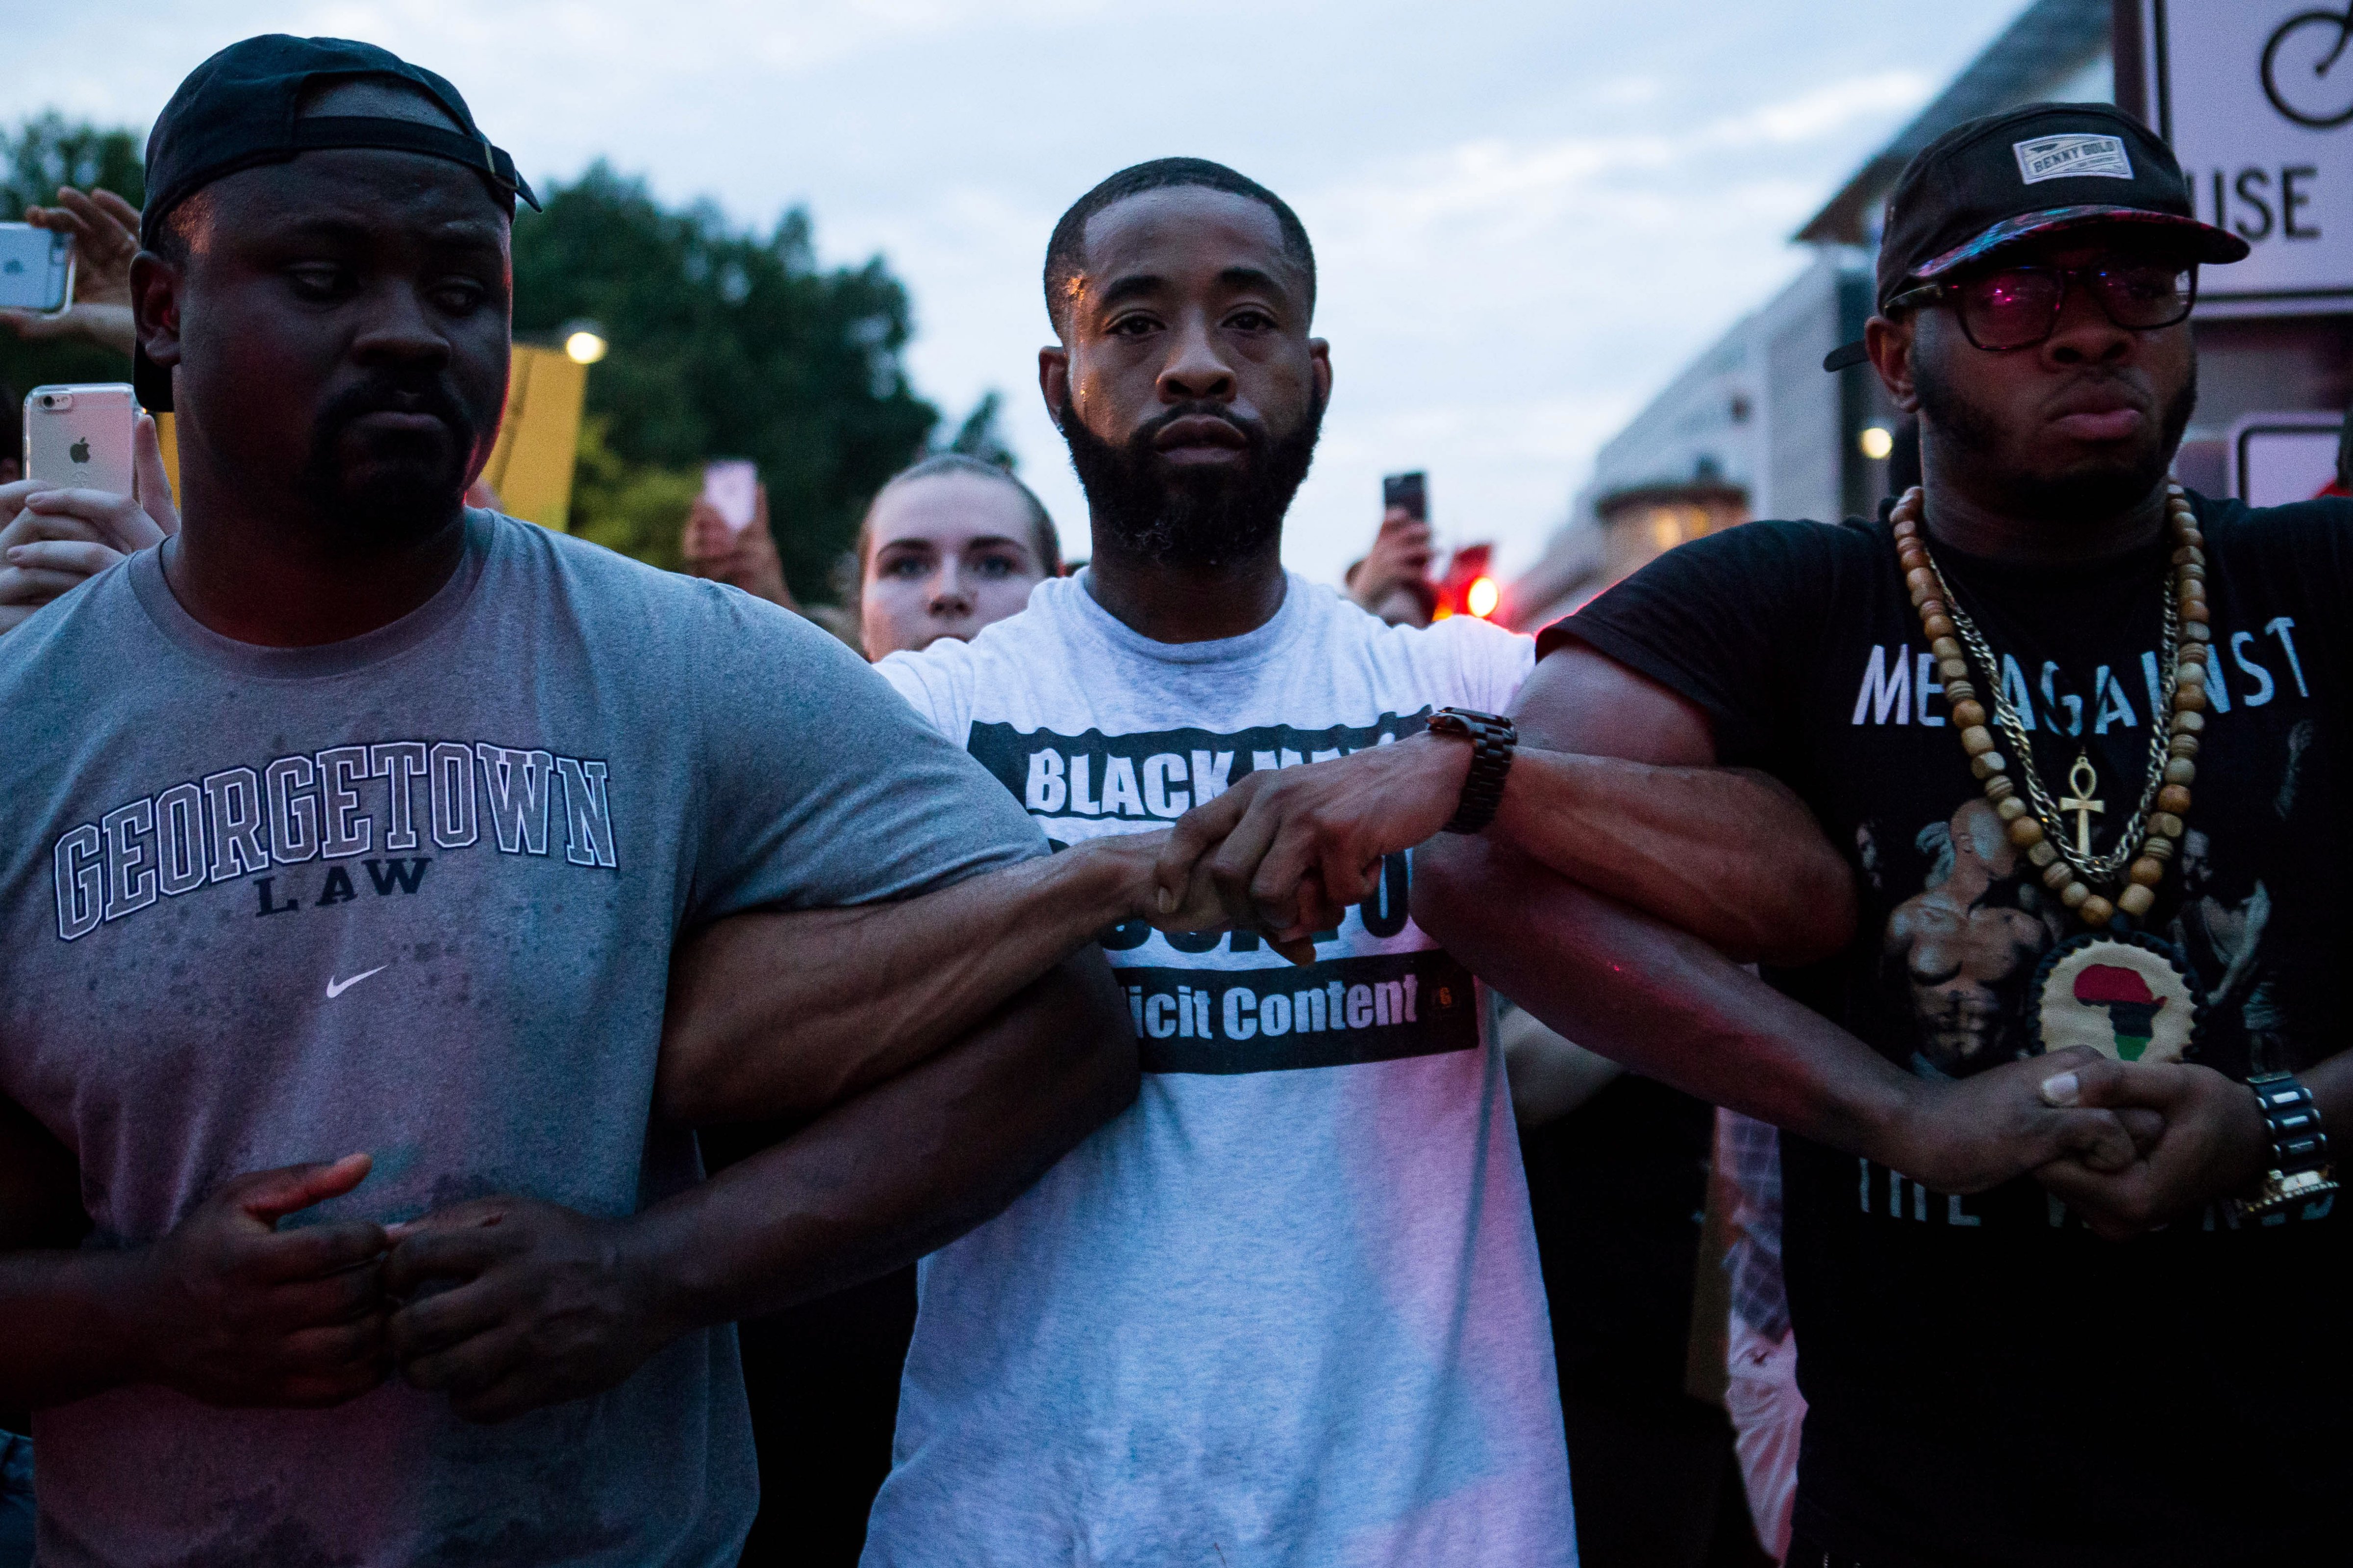 Demonstrators lock arms as they march from The White House on July 7, 2016, to protest the fatal police shootings of Alton Sterling and Philando Castile. (Zach Gibson&mdash;Getty Images)